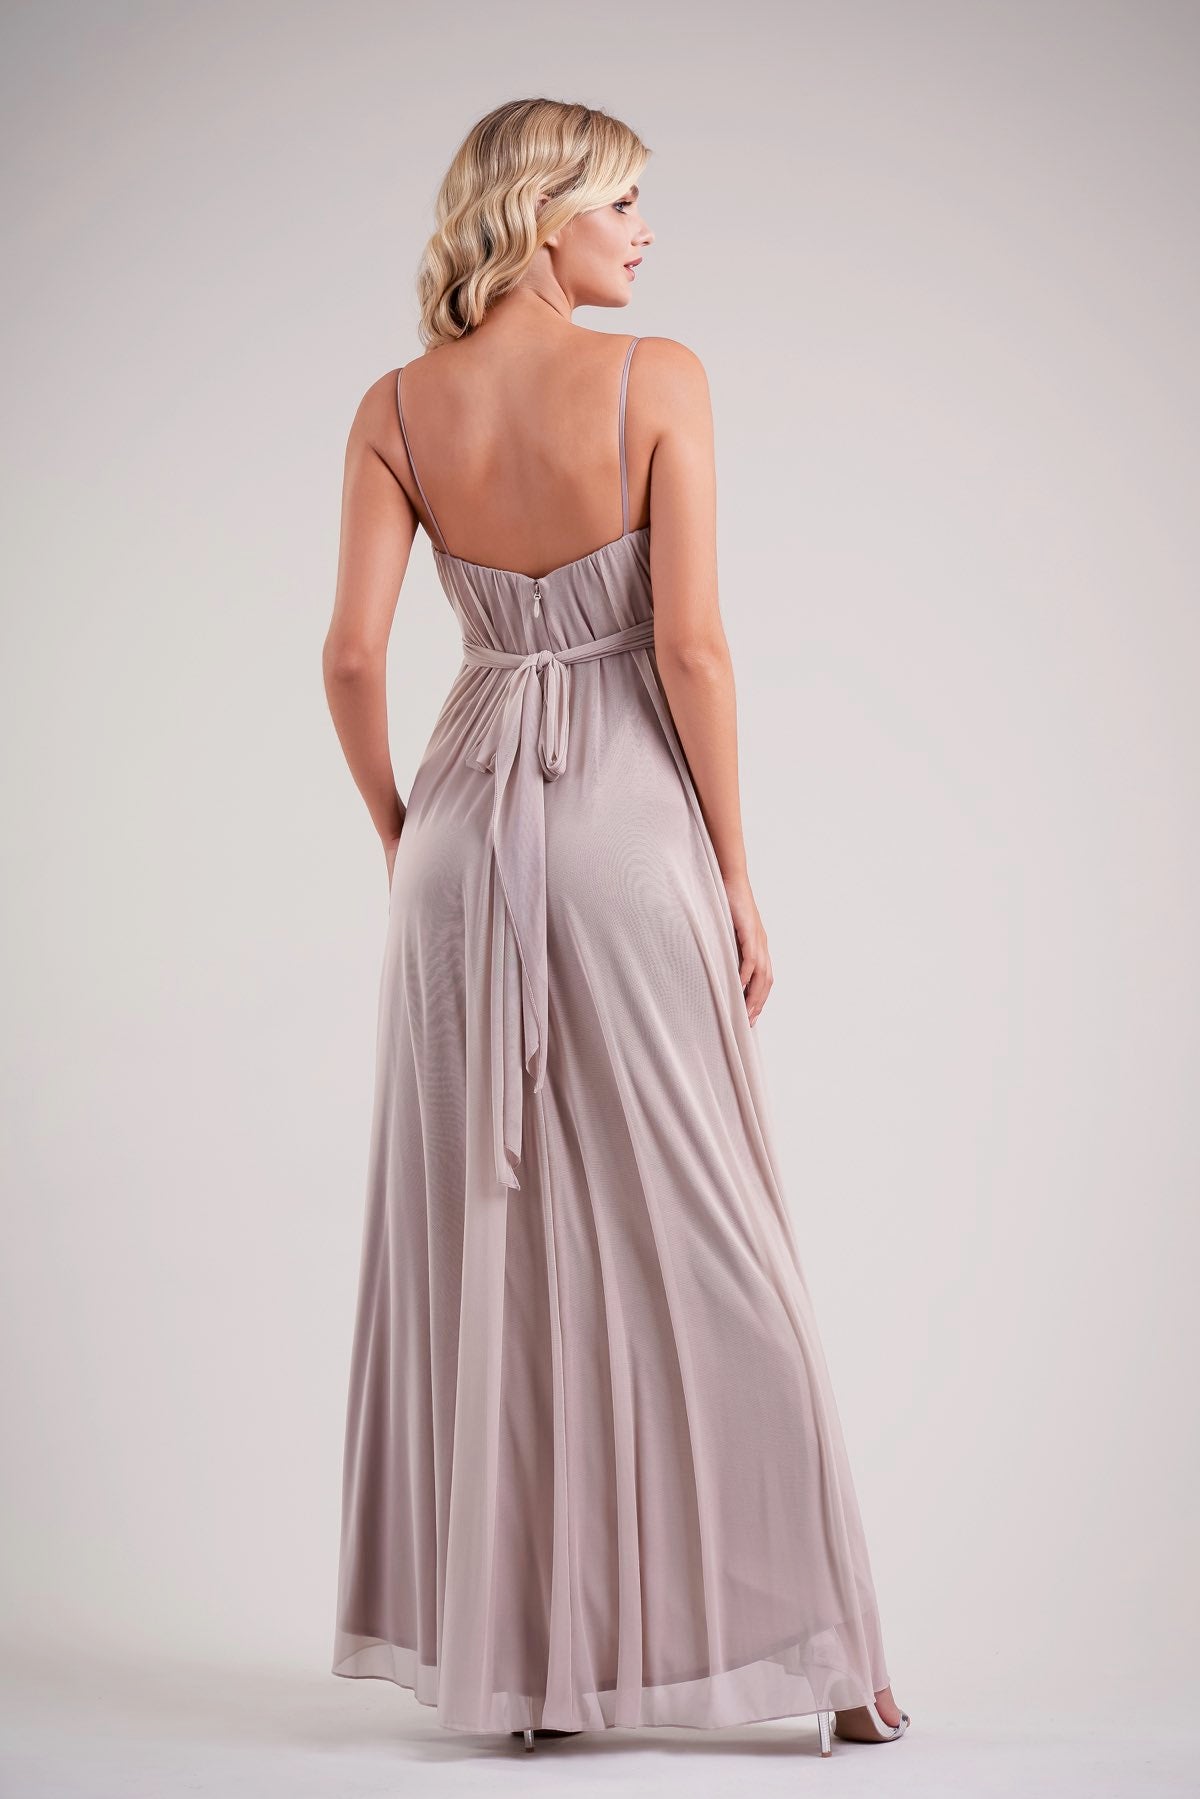 Stretch Illusion Dress with Spaghetti Straps and Angled Skirt | Several Colors - Sizes 00-34 | In Store ONLY